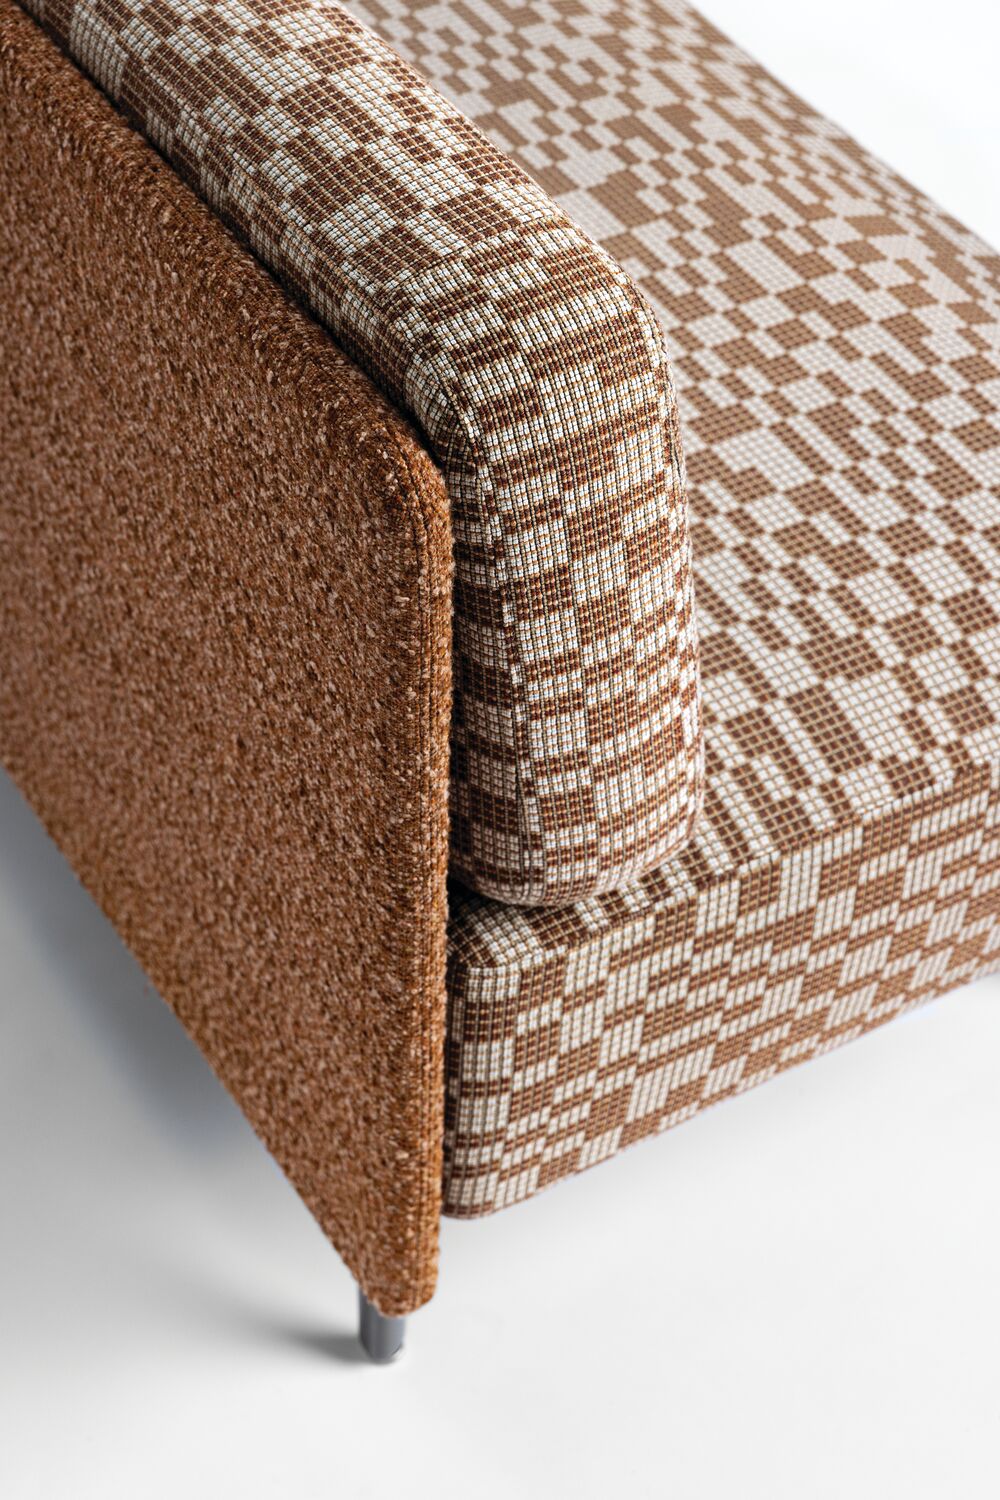 Everyday Boucle - Thicket - 4111 - 09 Product Image